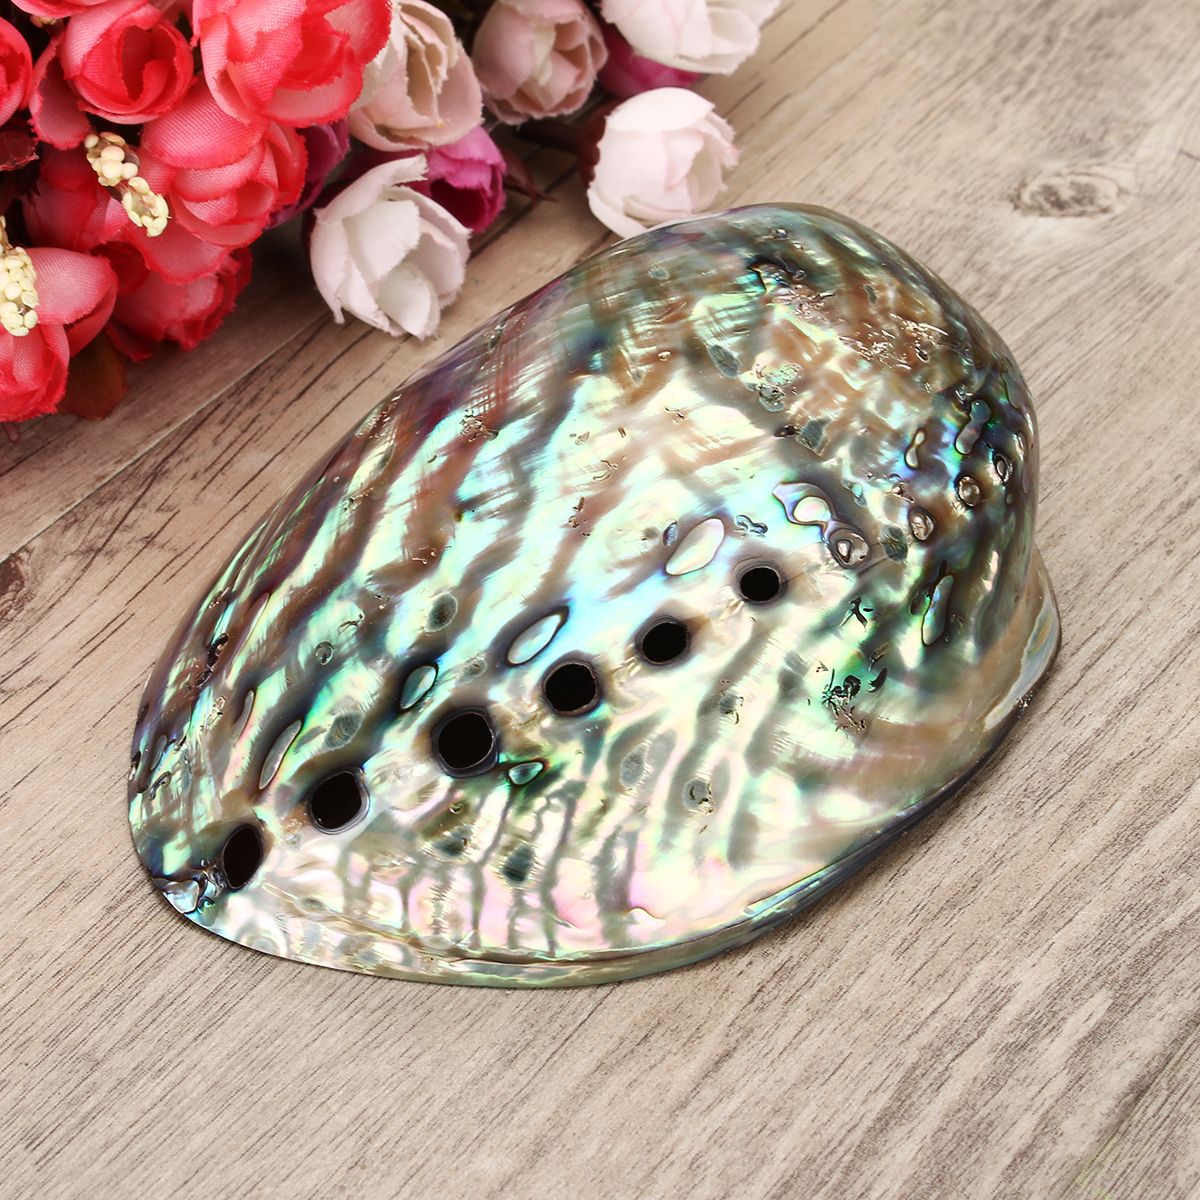 13X10CM-Natural-Abalone-Sea-Shell-Both-Side-Polished-Beach-Craft-DIY-Decorations-1459015